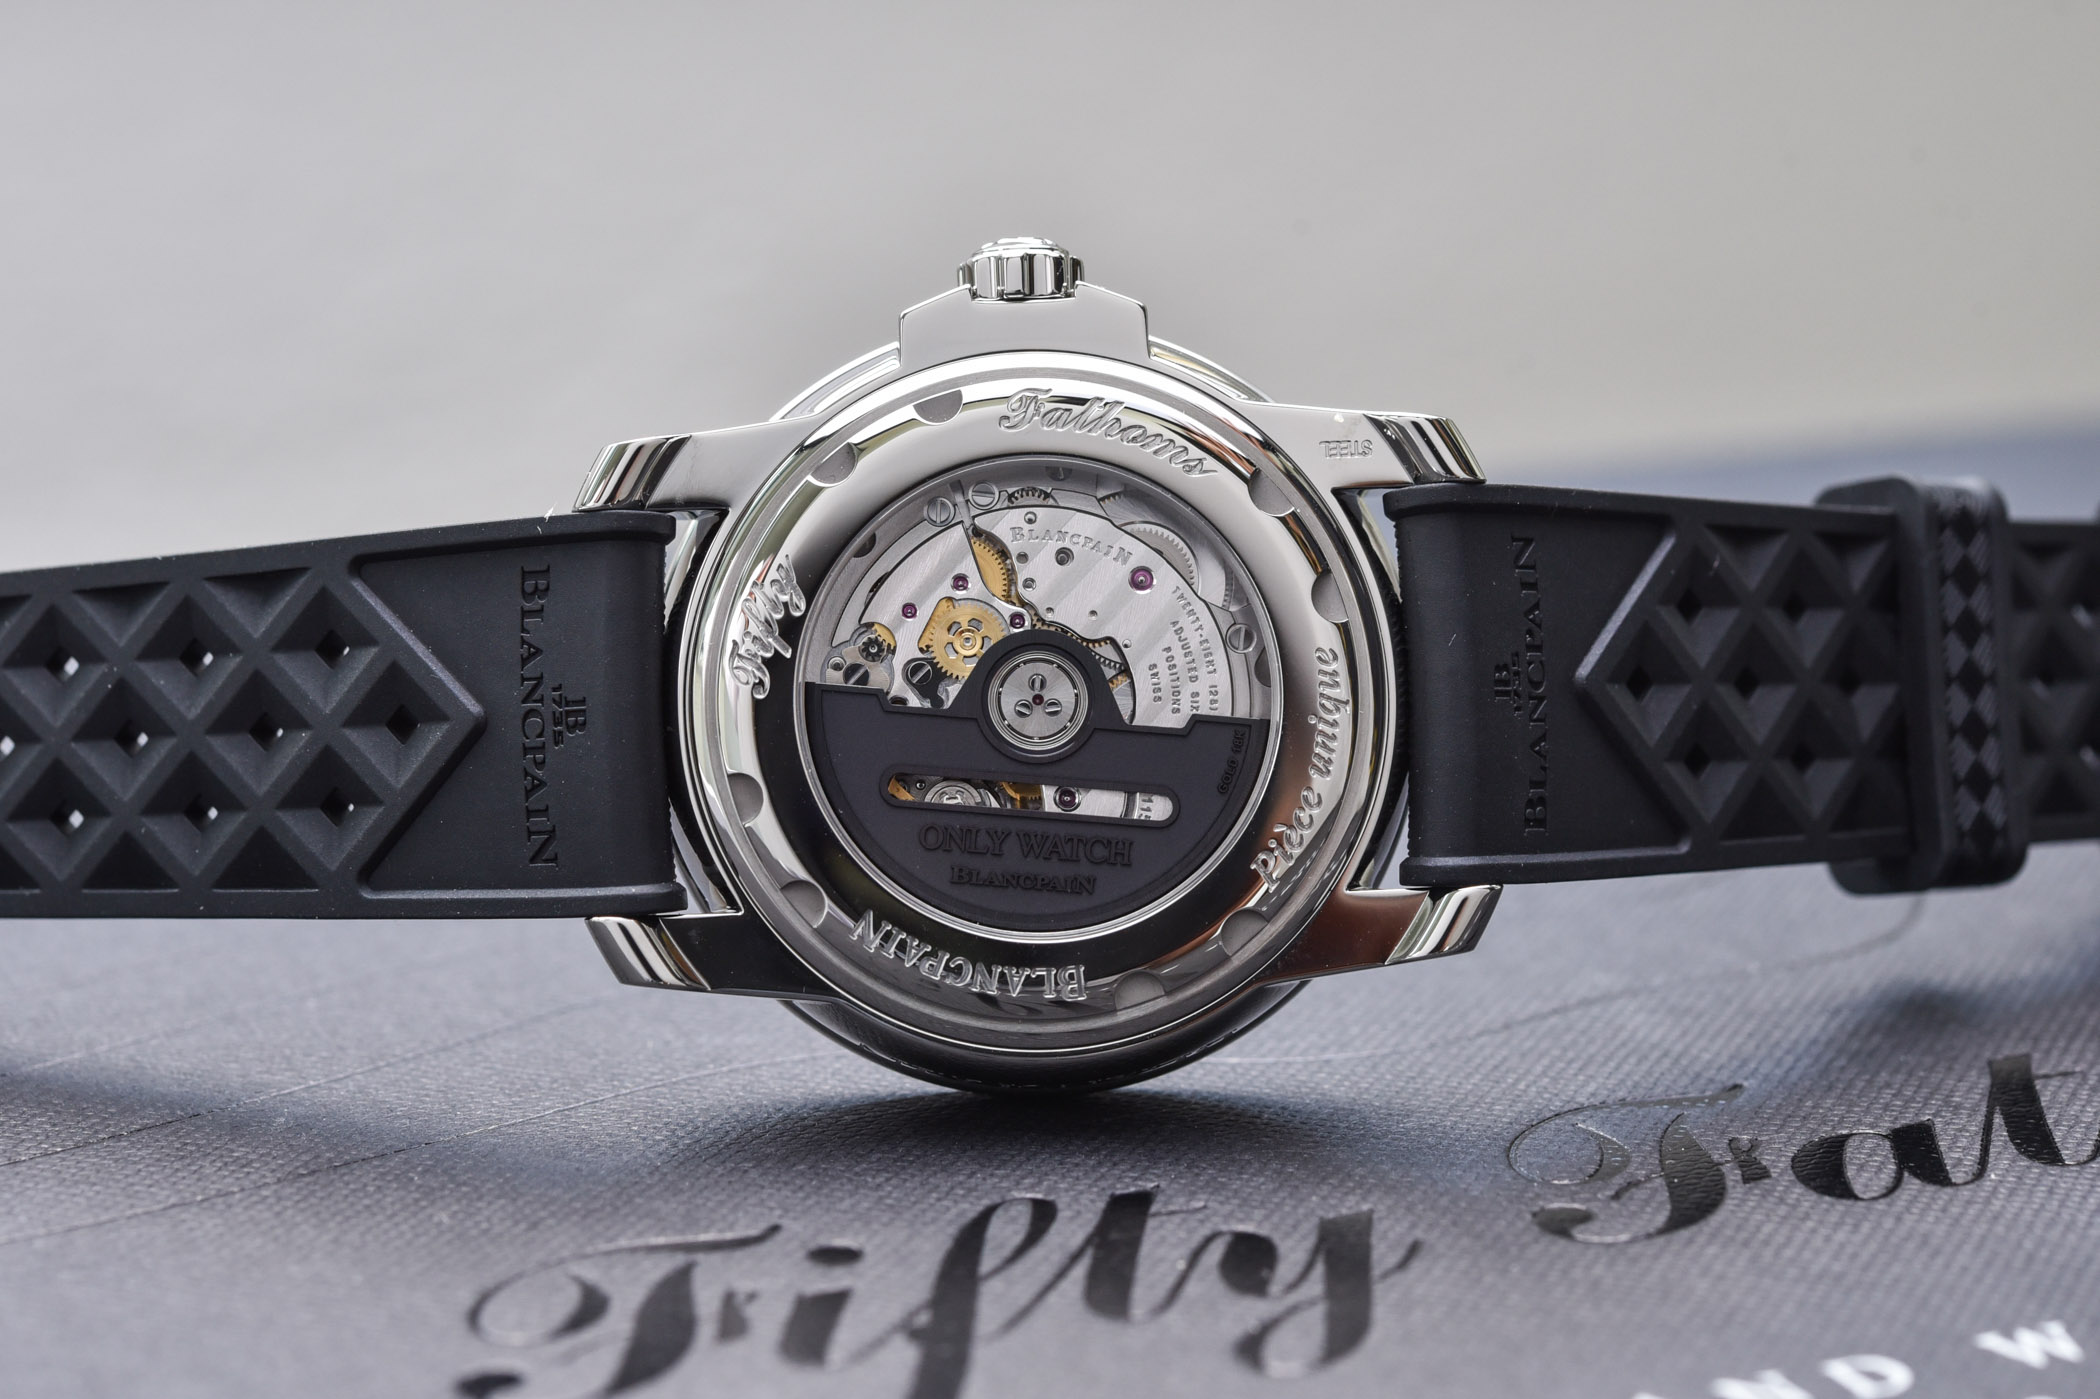 Blancpain Tribute to Fifty Fathoms No Rad for Only Watch 2021